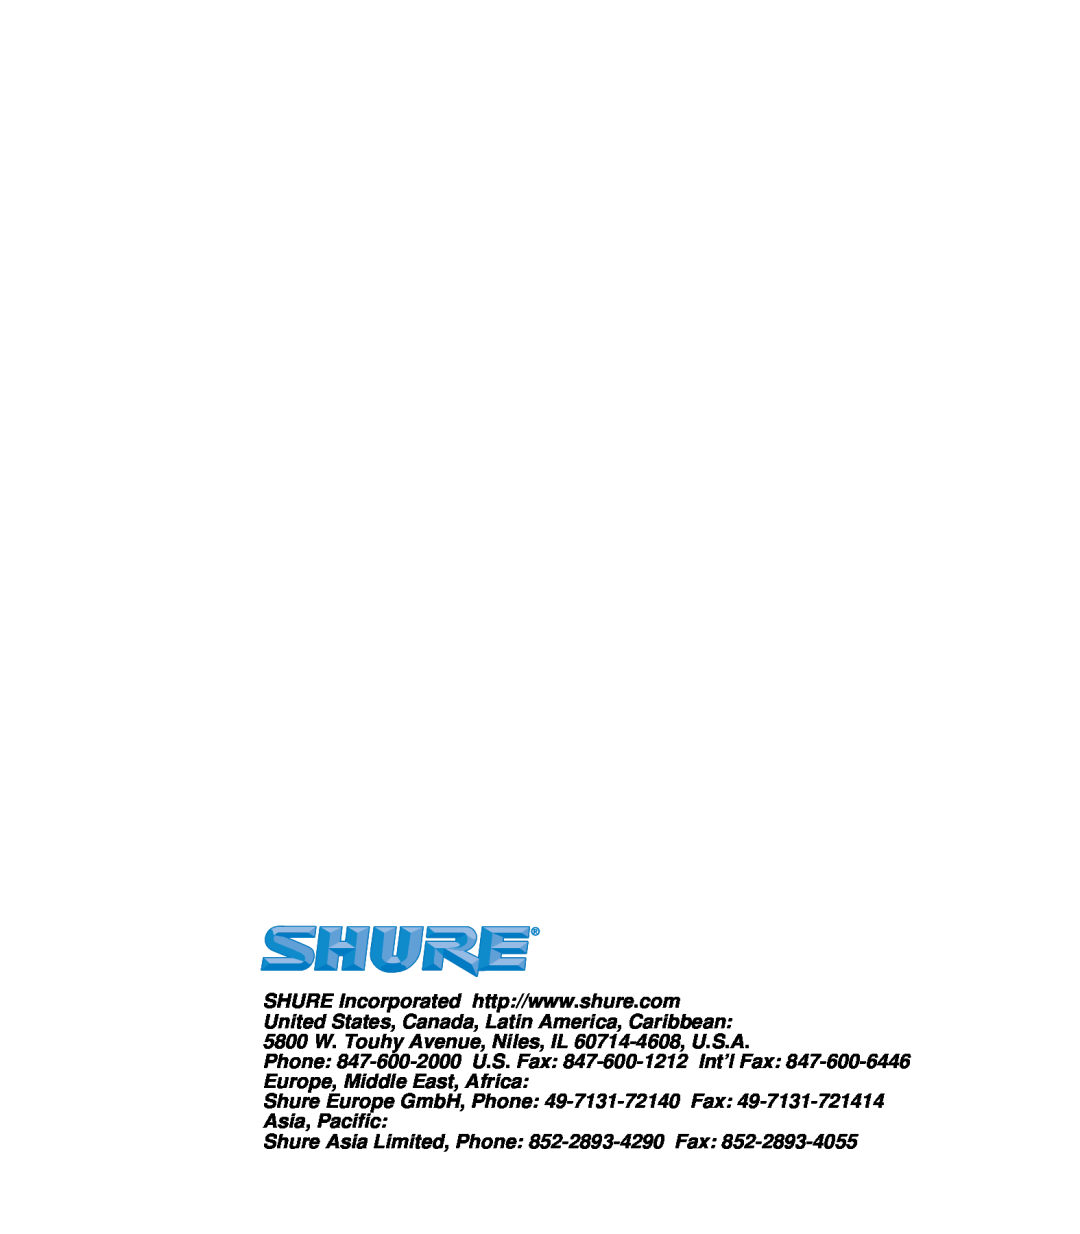 Shure WH20 manual Shure Asia Limited, Phone 852-2893-4290Fax 